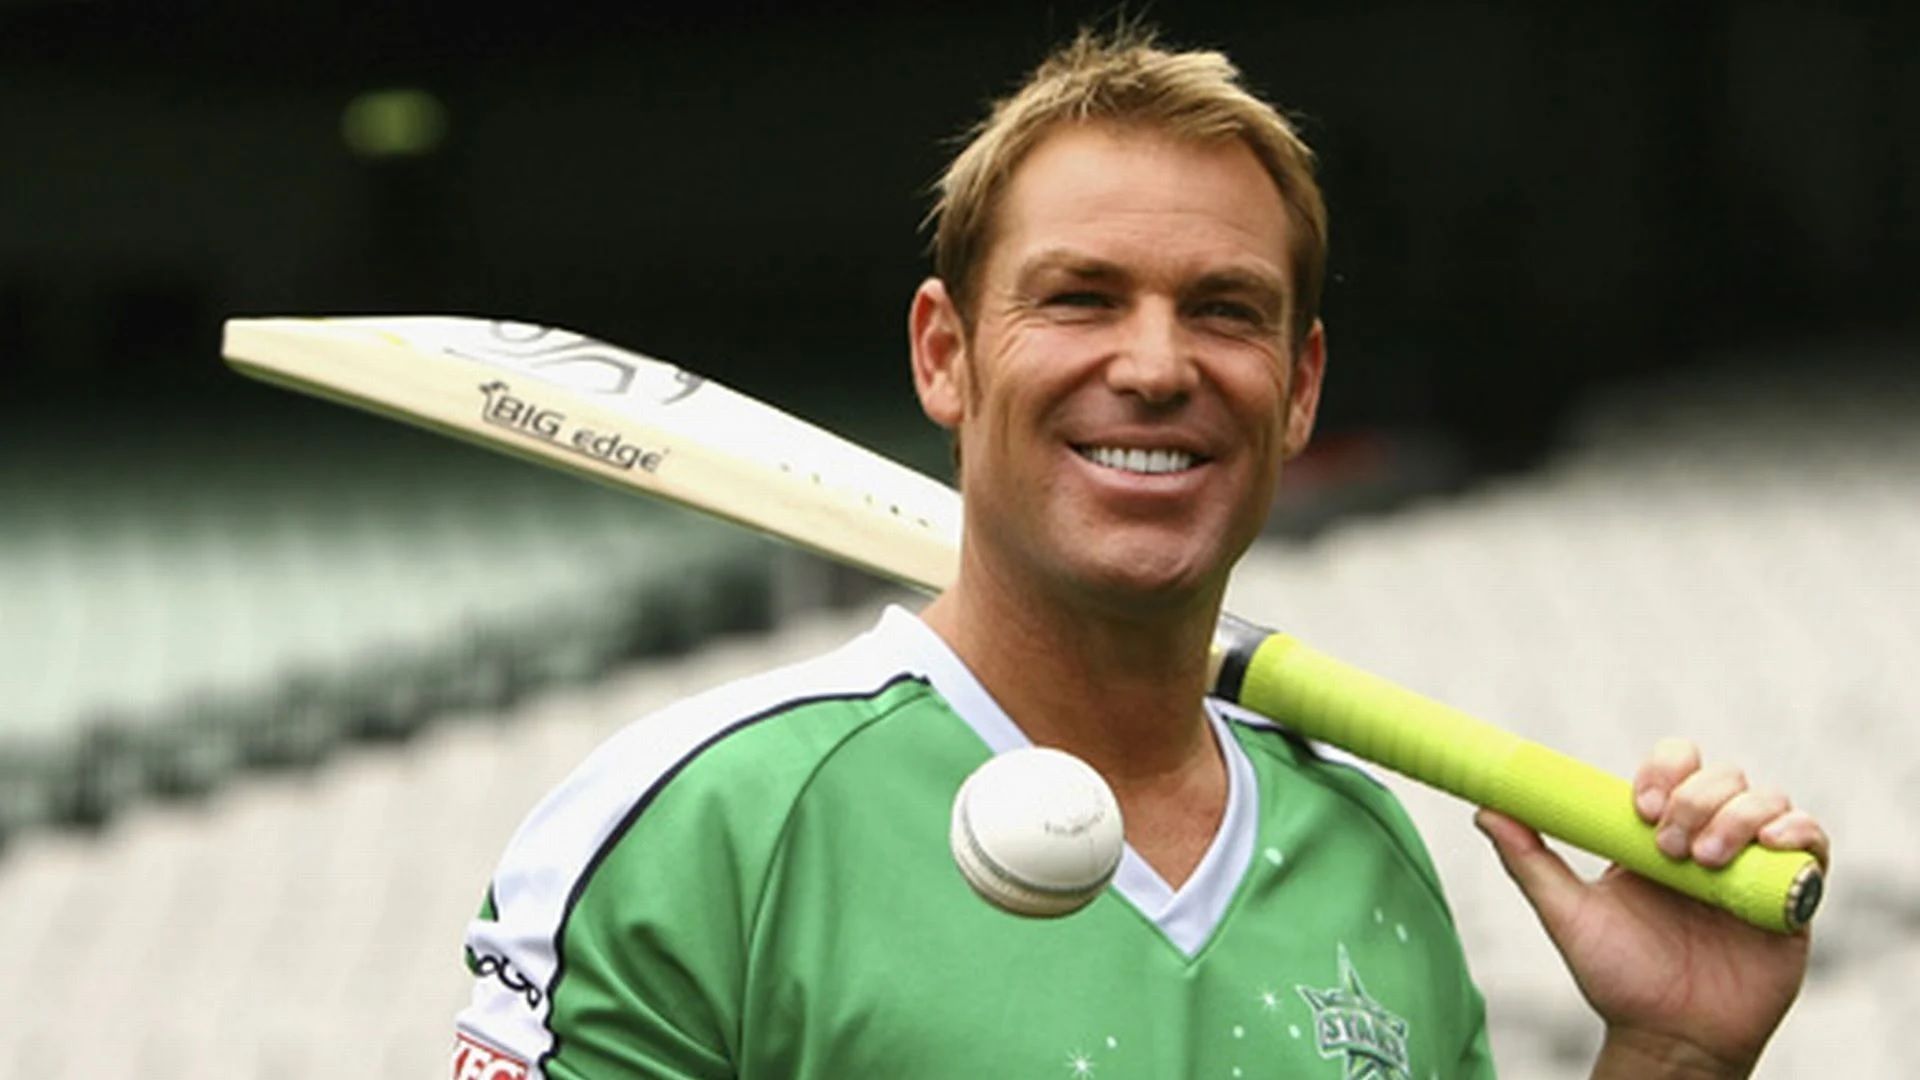 Warne holds the dubious record of scoring the most Test runs without hitting a century